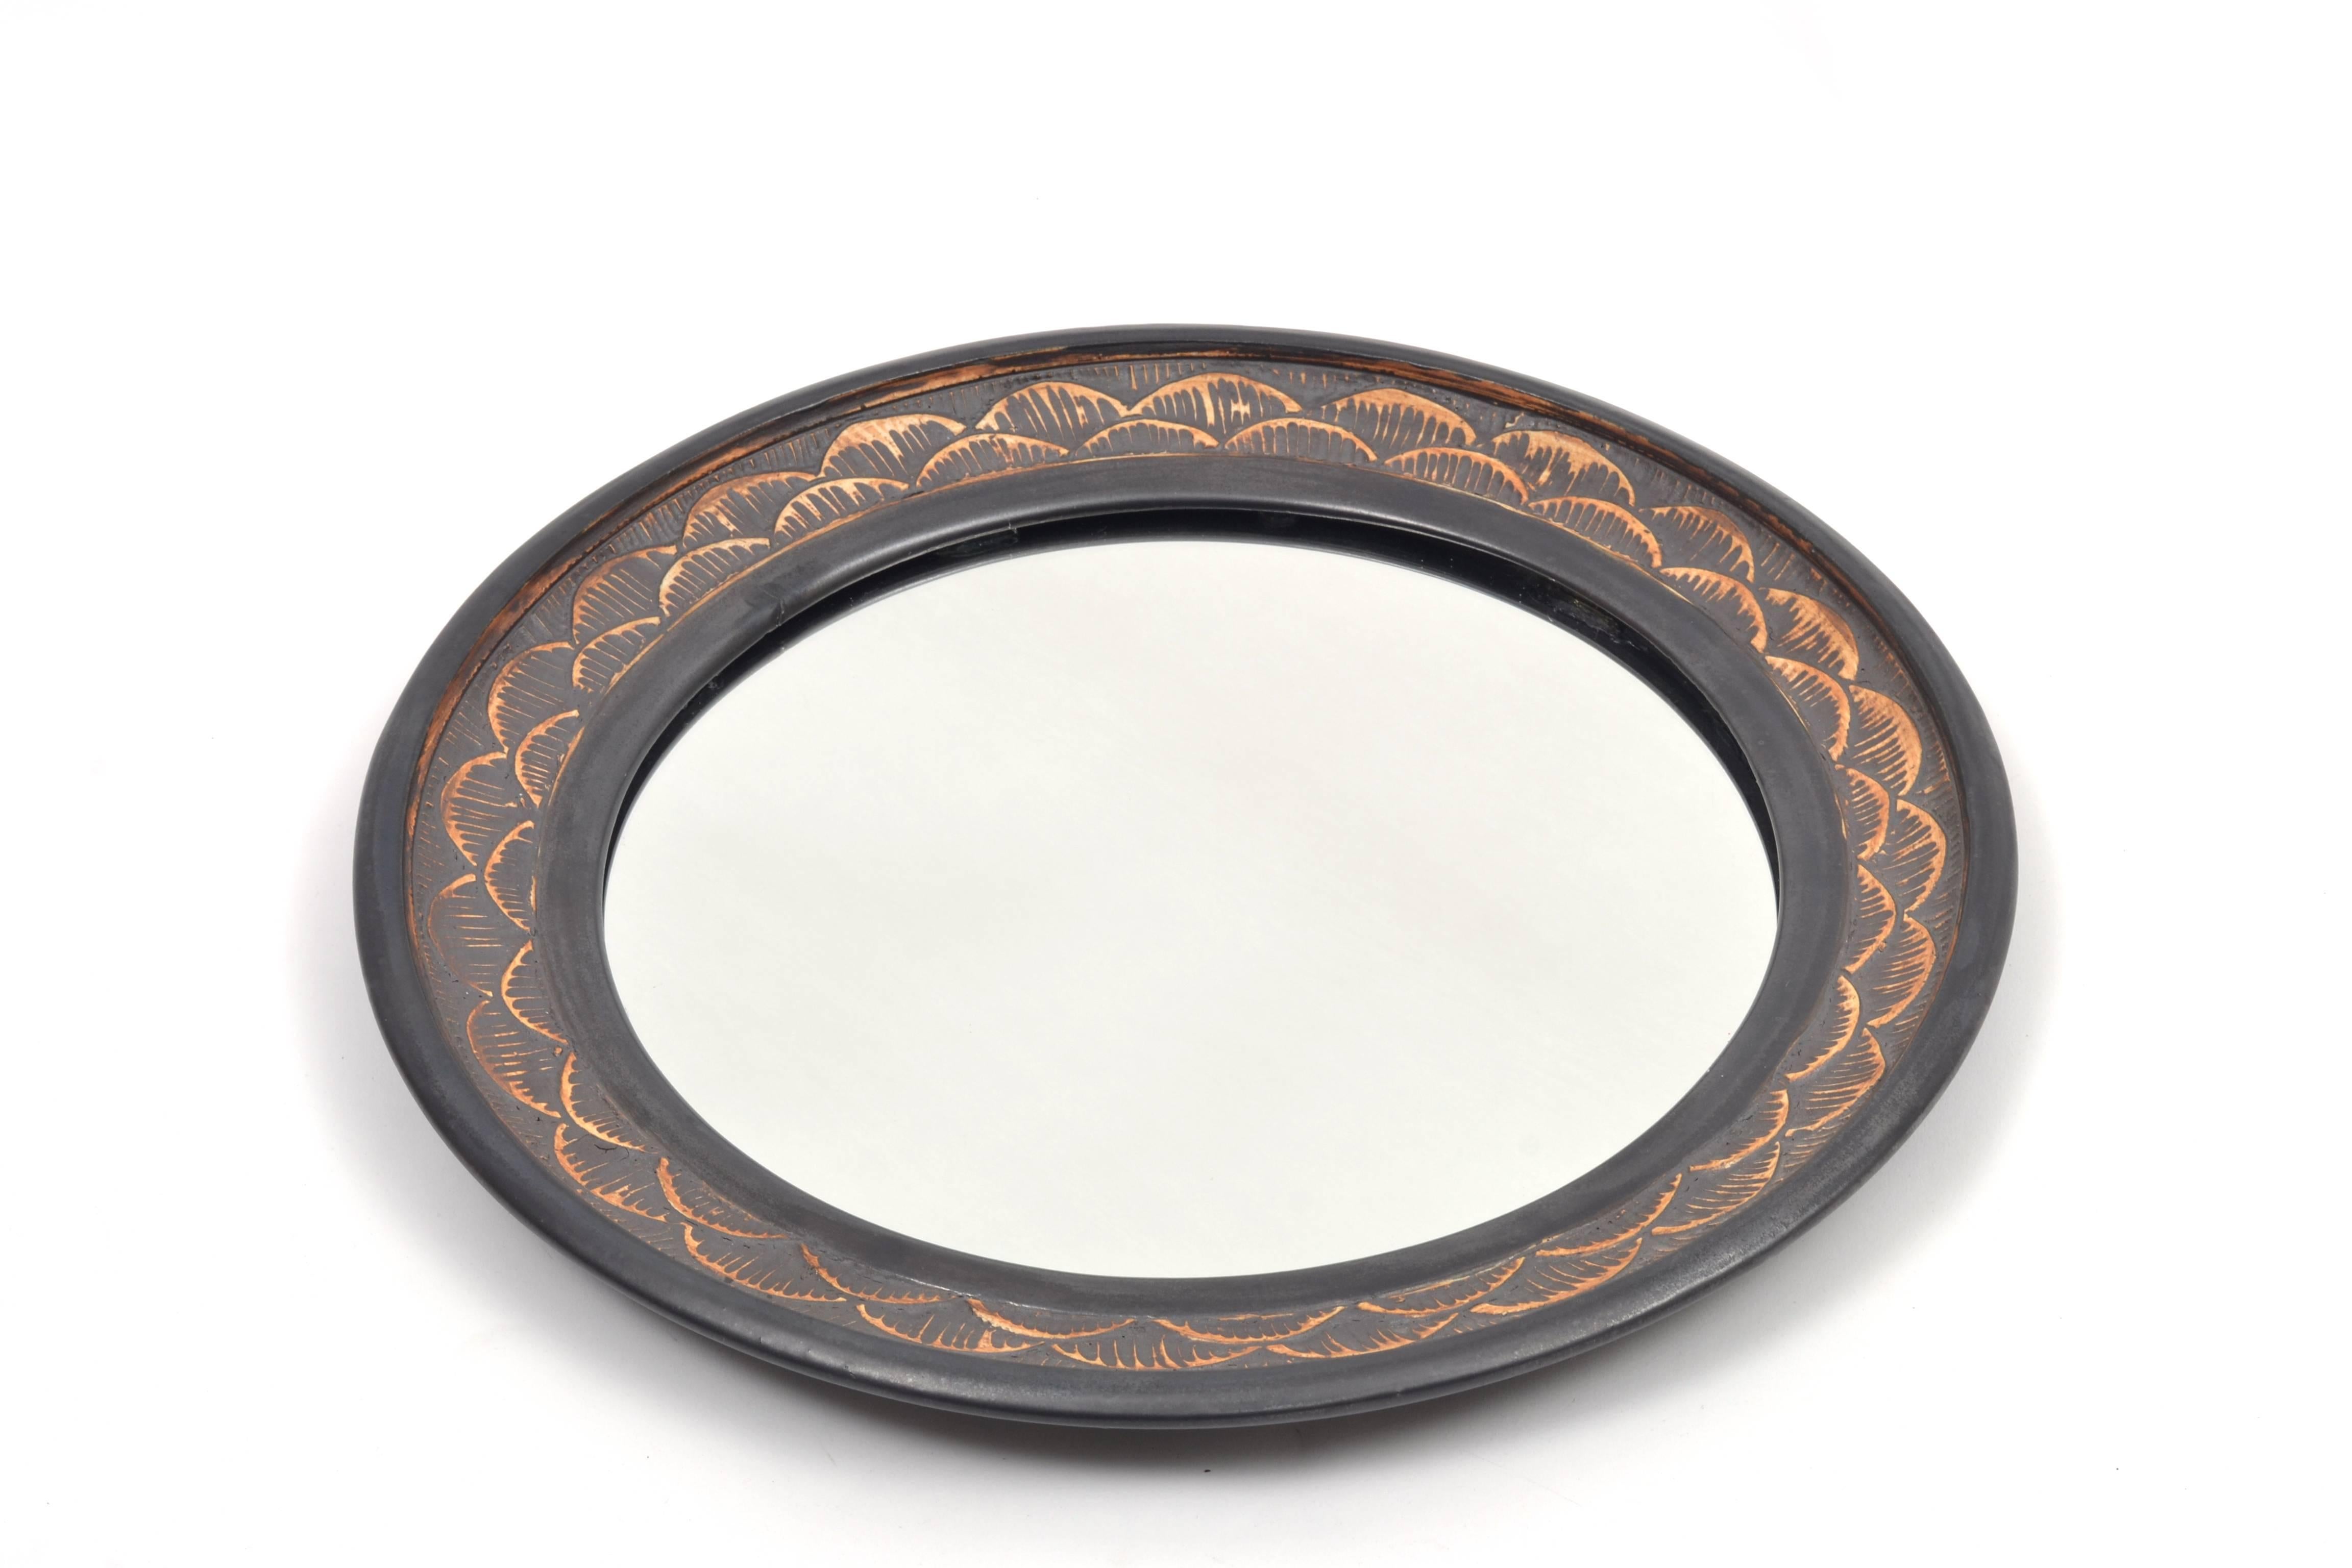 Rare, signed ceramic frame mirror by Cranbrook Academy alumni and former Maija Grotell assistant, Stephen Polchert (1920-2008). Few Polchert mirrors are known to exist.